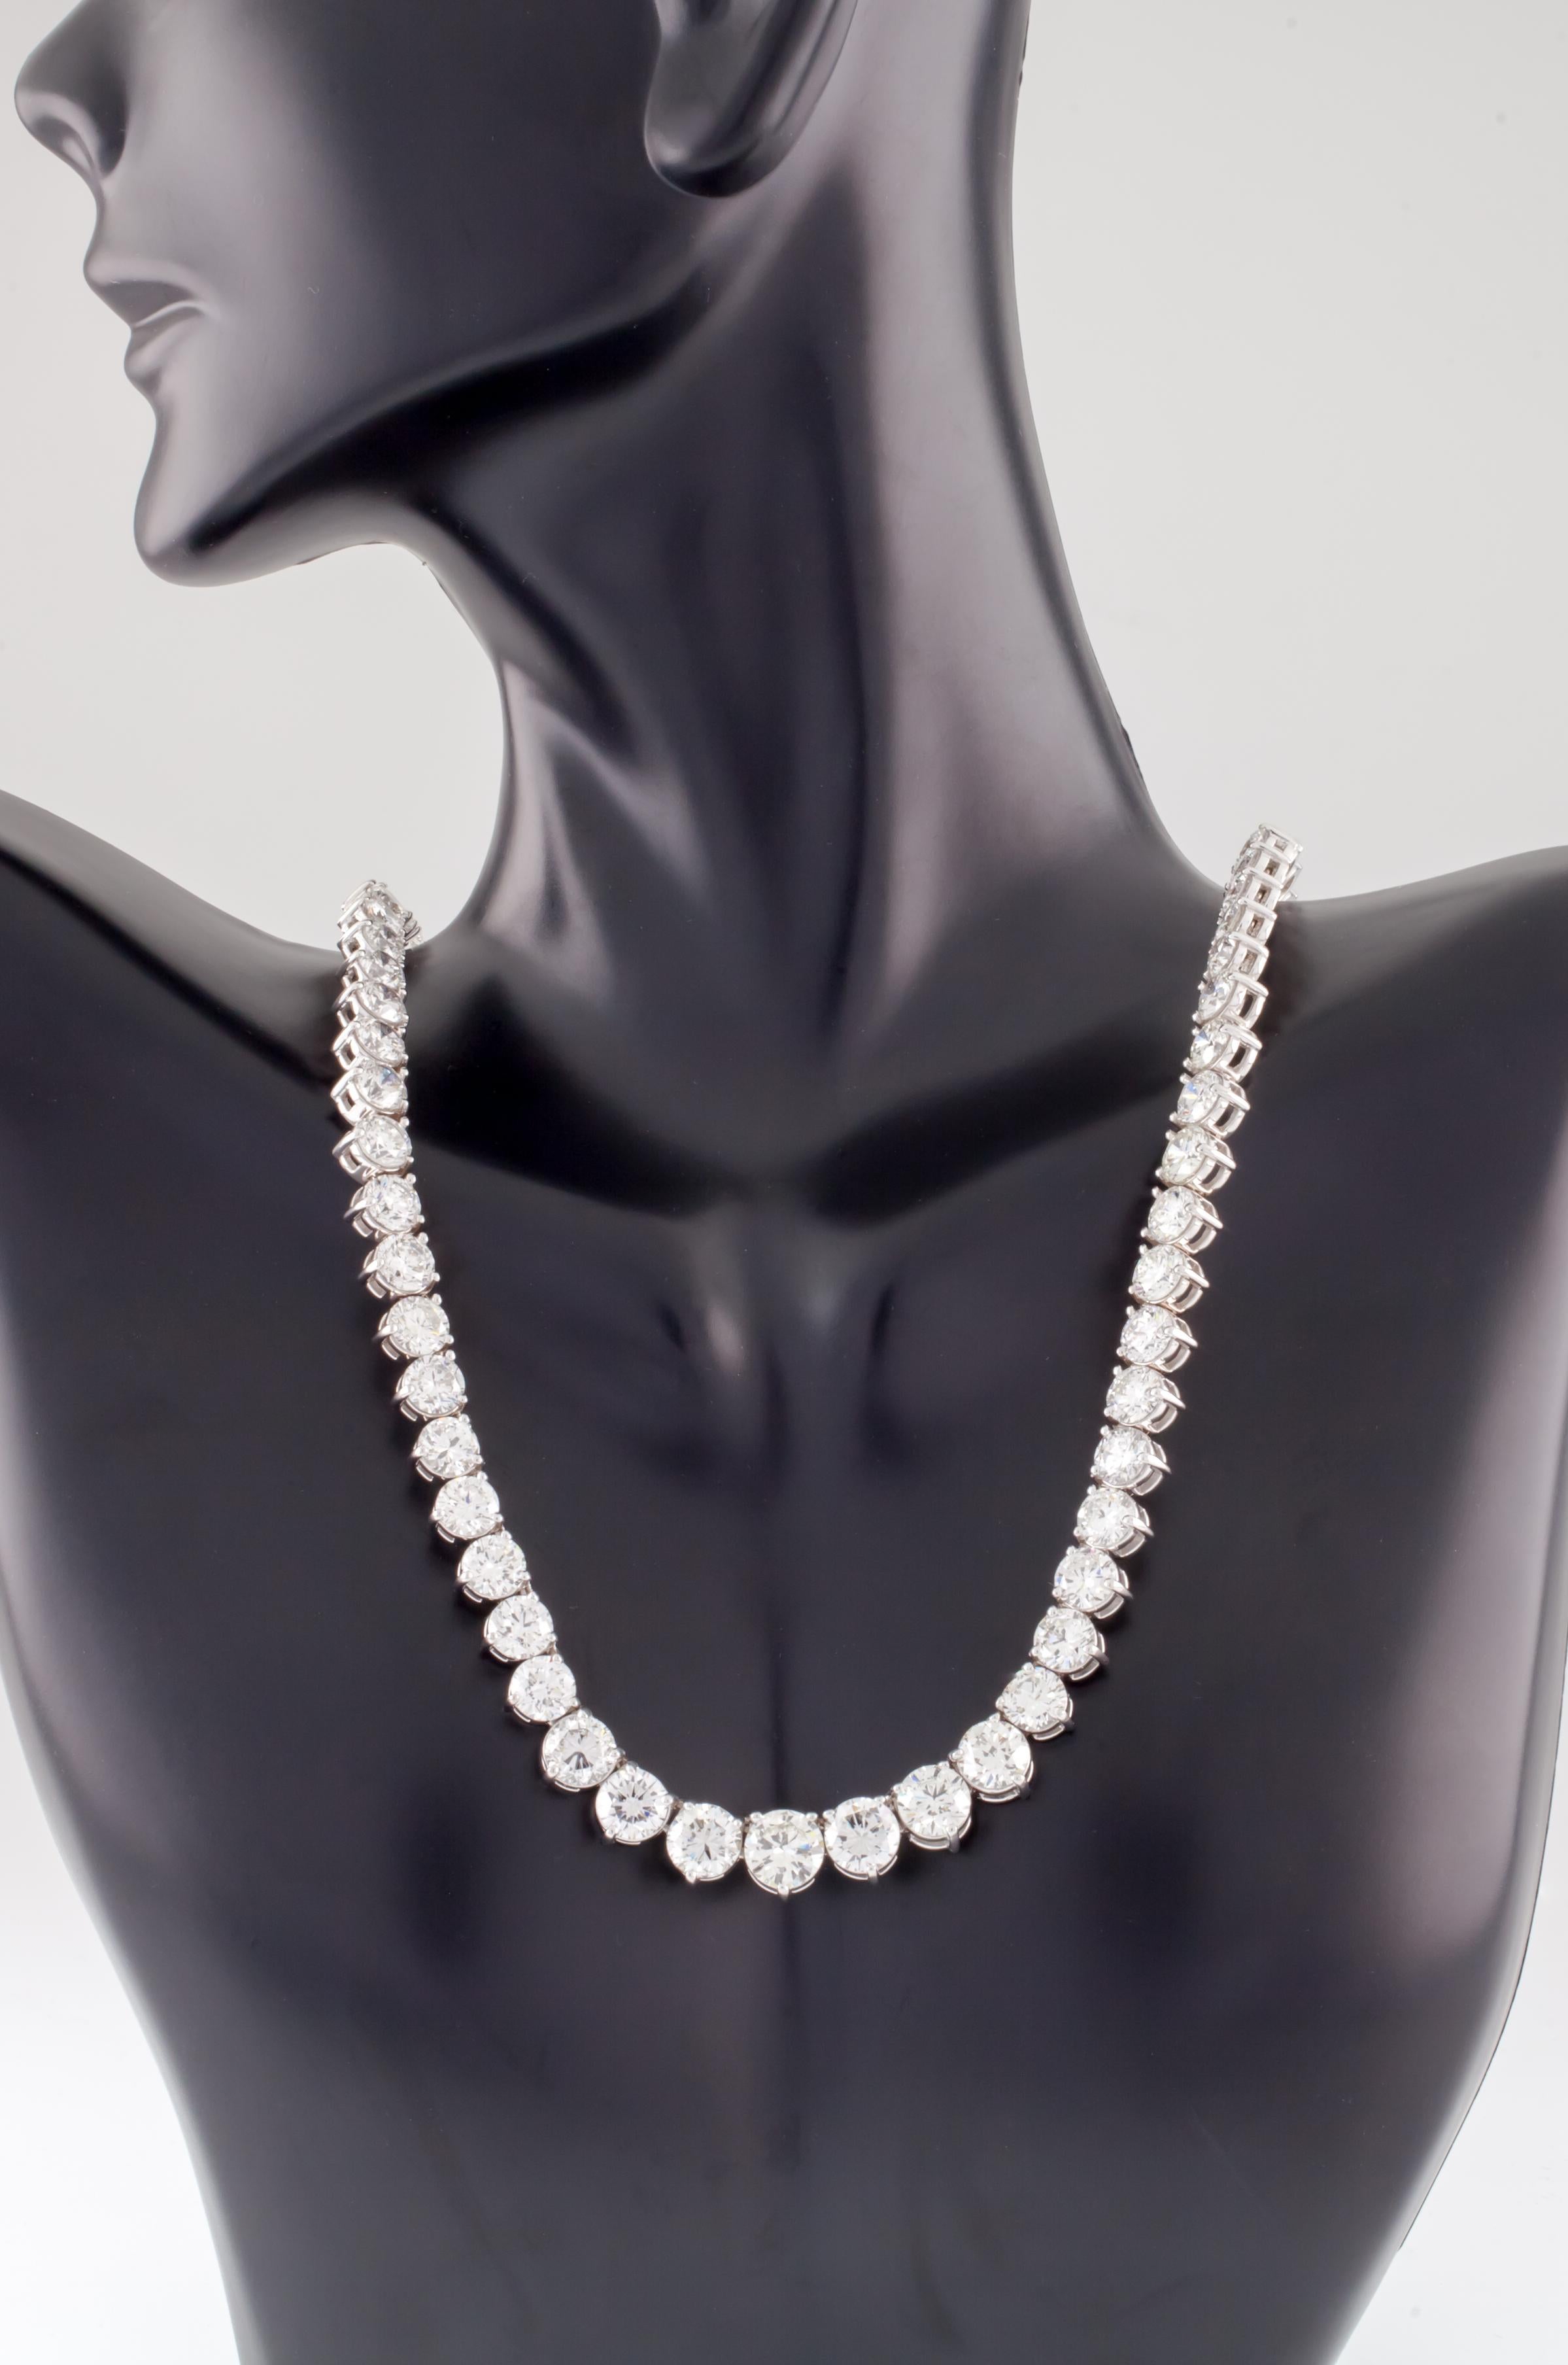 43.19 Carat Round Diamond Graduated Tennis Necklace in White Gold In New Condition For Sale In Sherman Oaks, CA